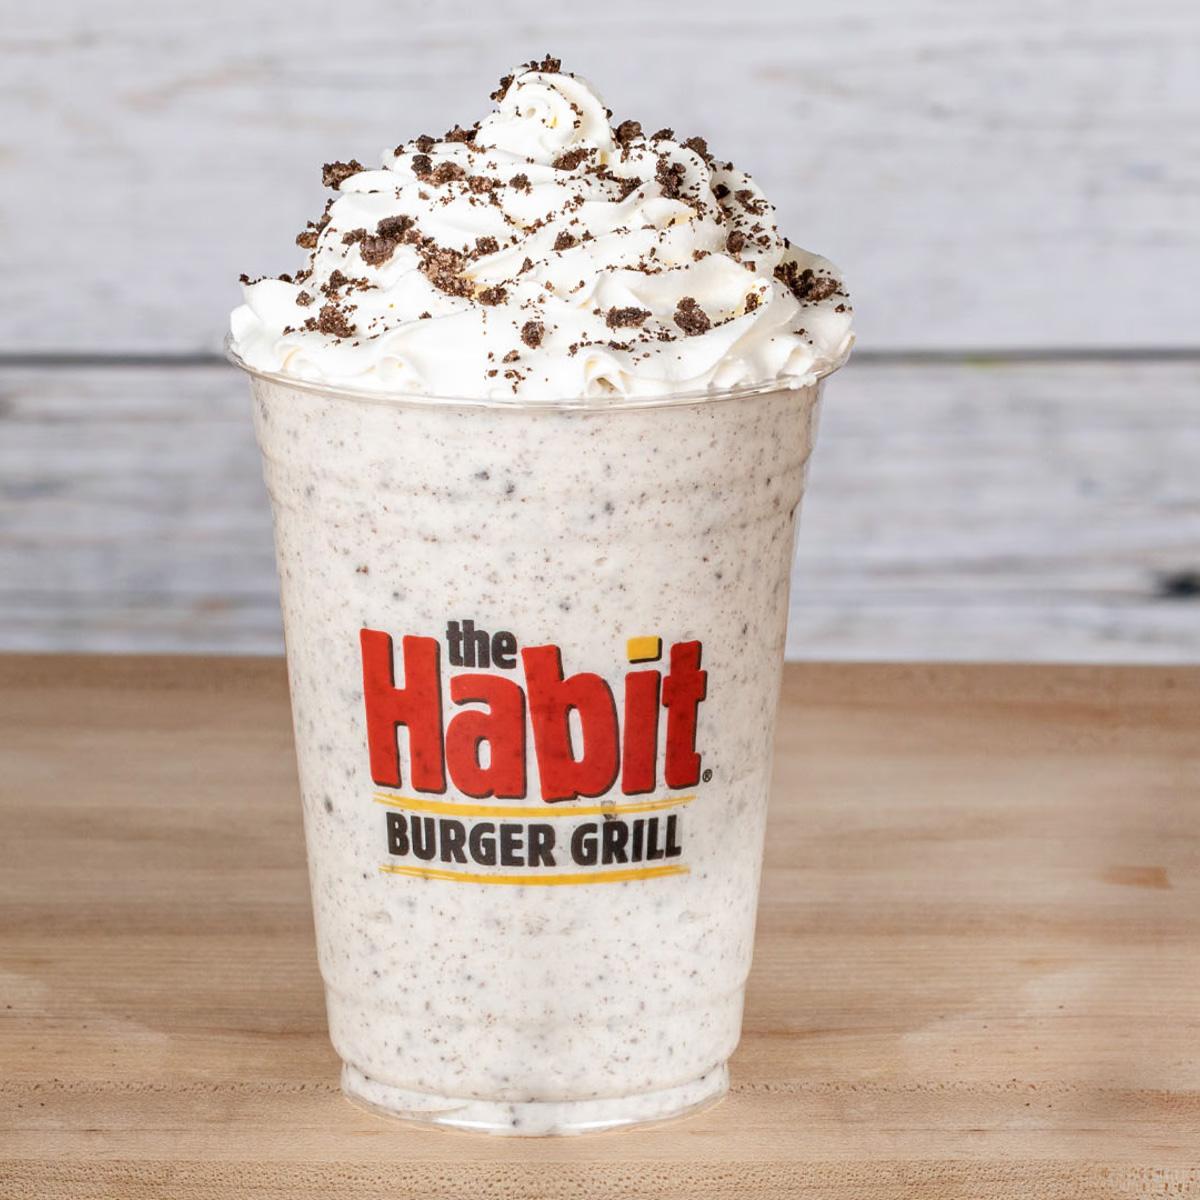 Free Habit Burger Milk Shake with a $2 Purchase